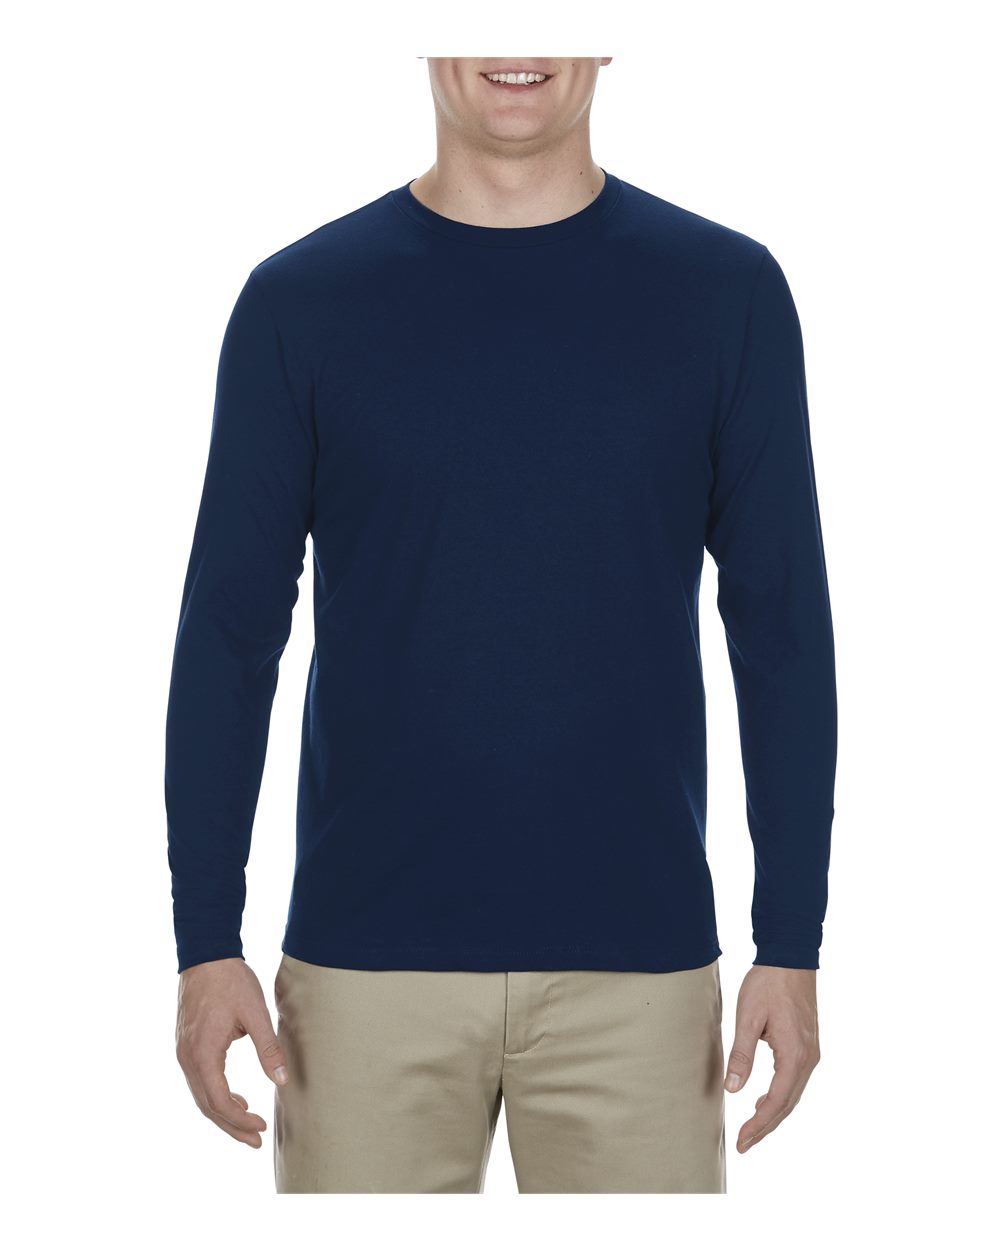 Alstyle 5304 - Ultimate Long Sleeve Tee $7.15 - T-Shirts